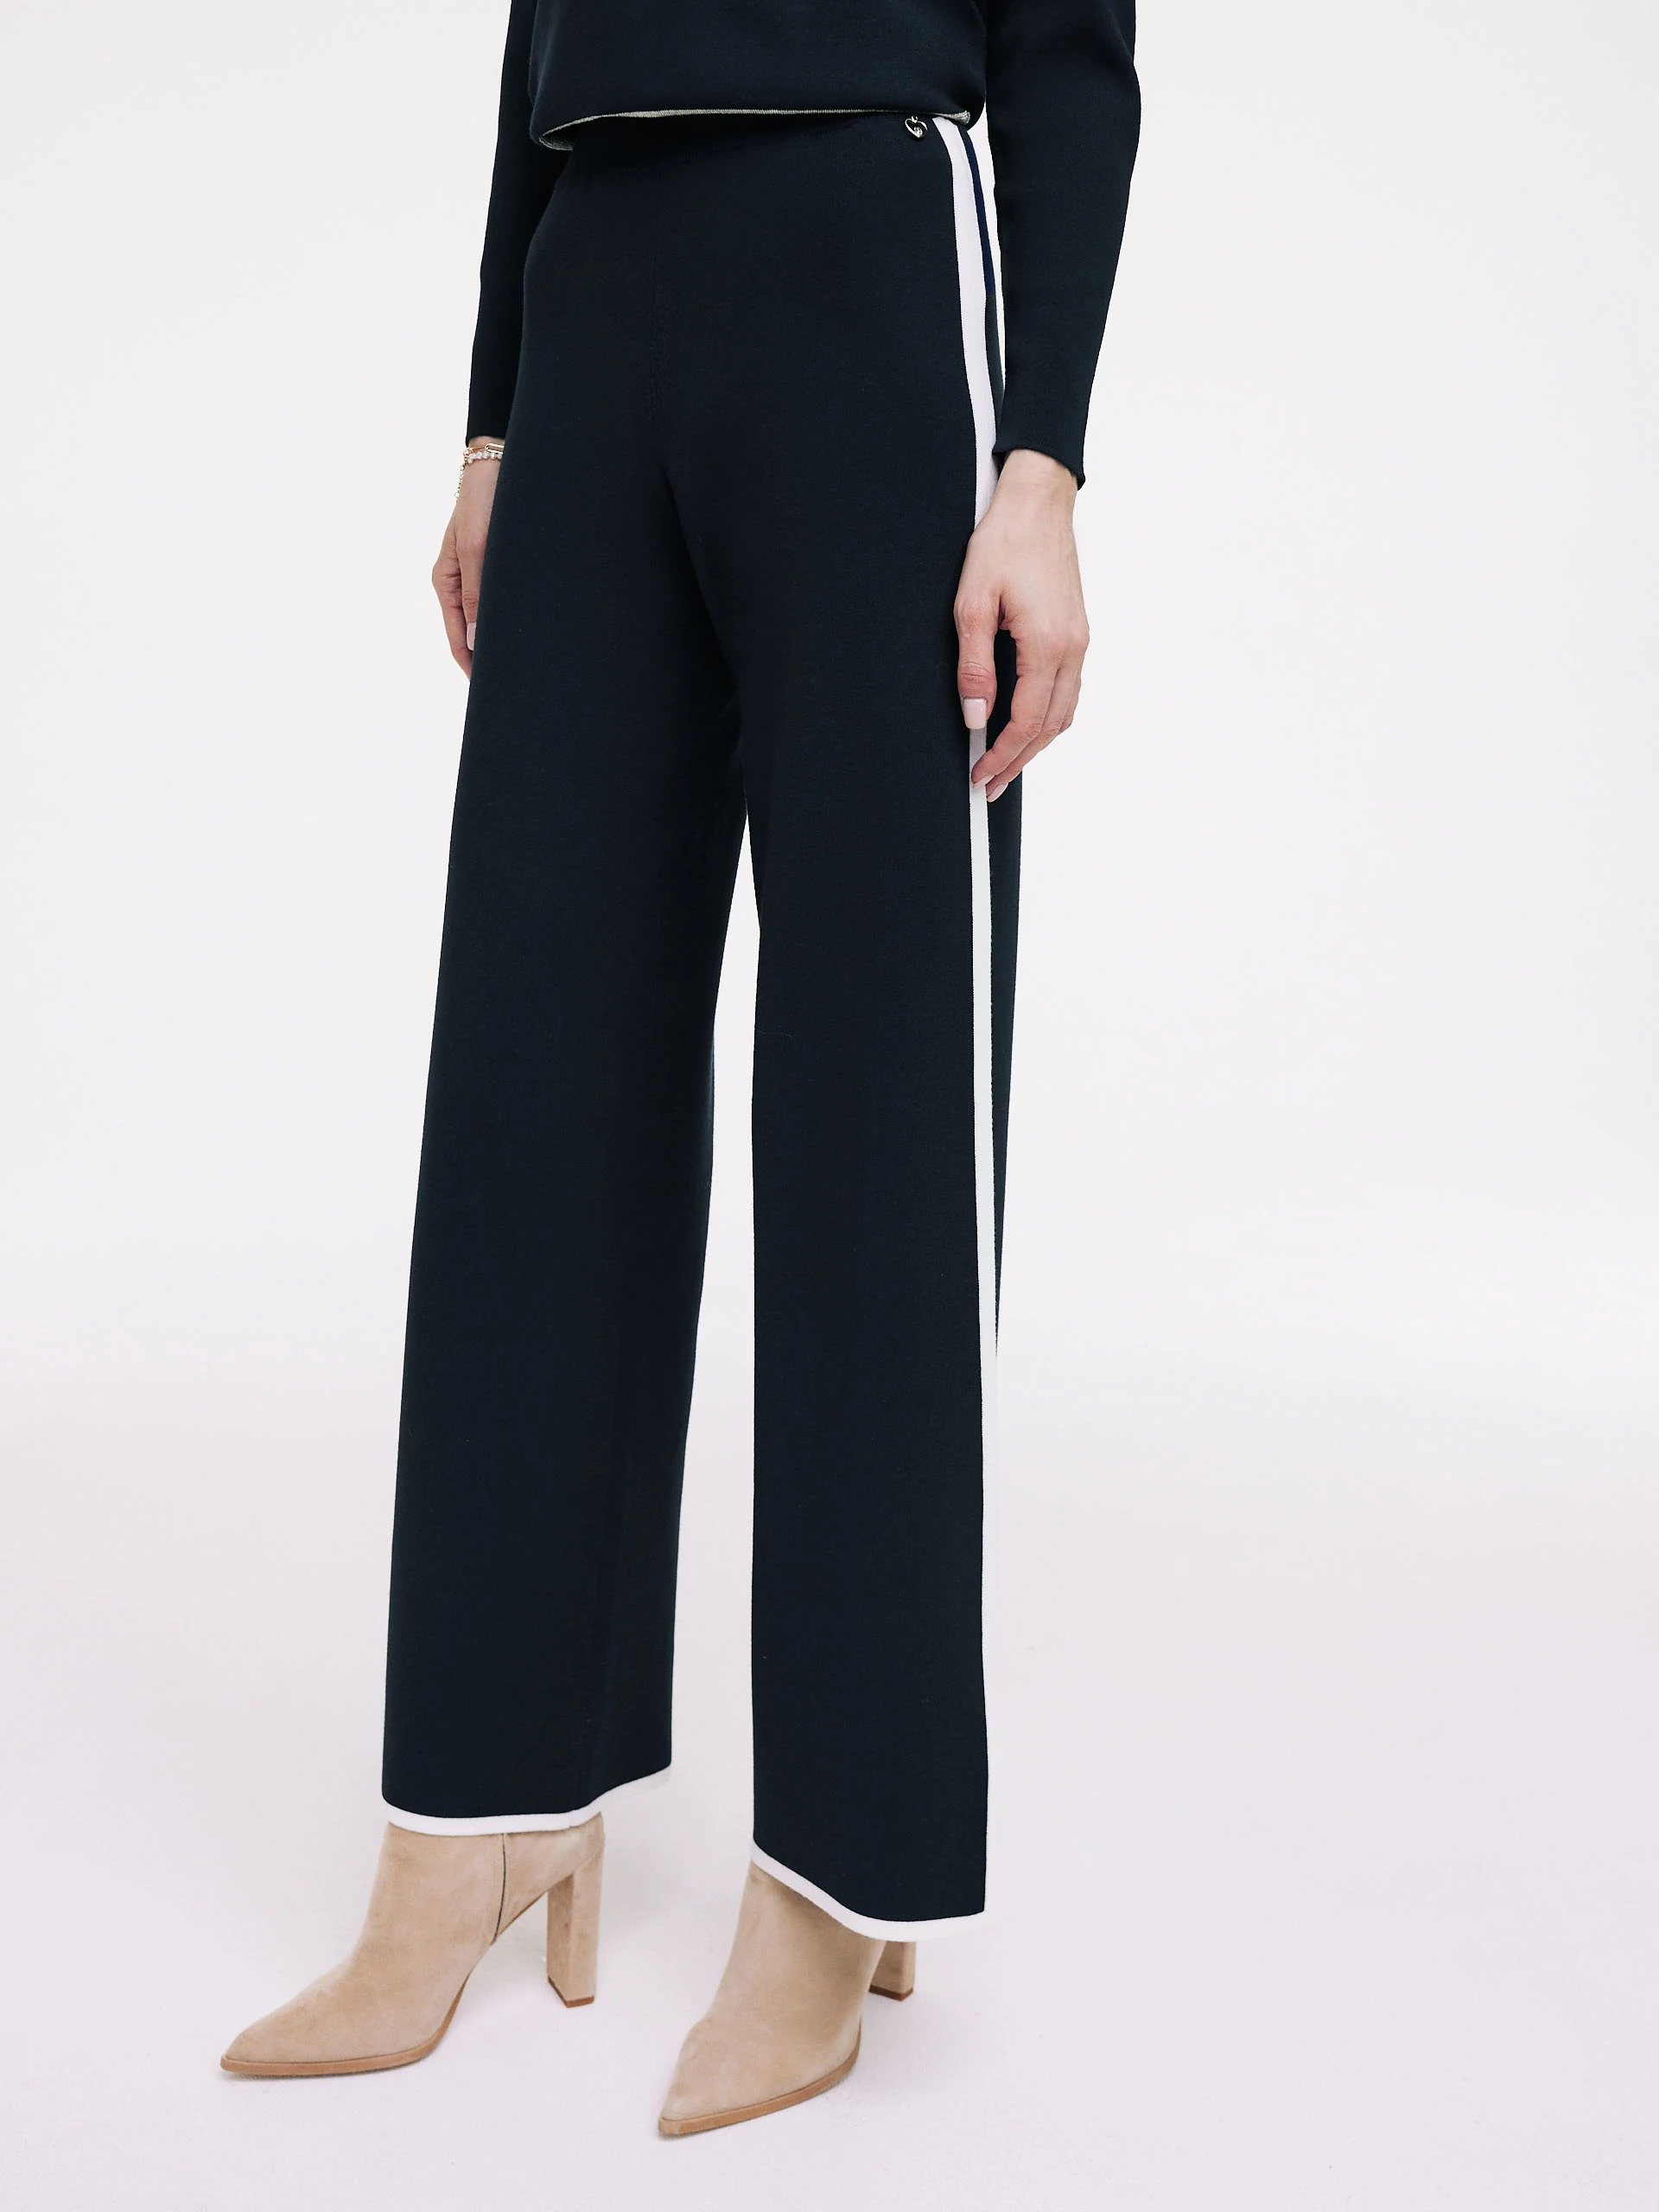 Navy blue pants with piping